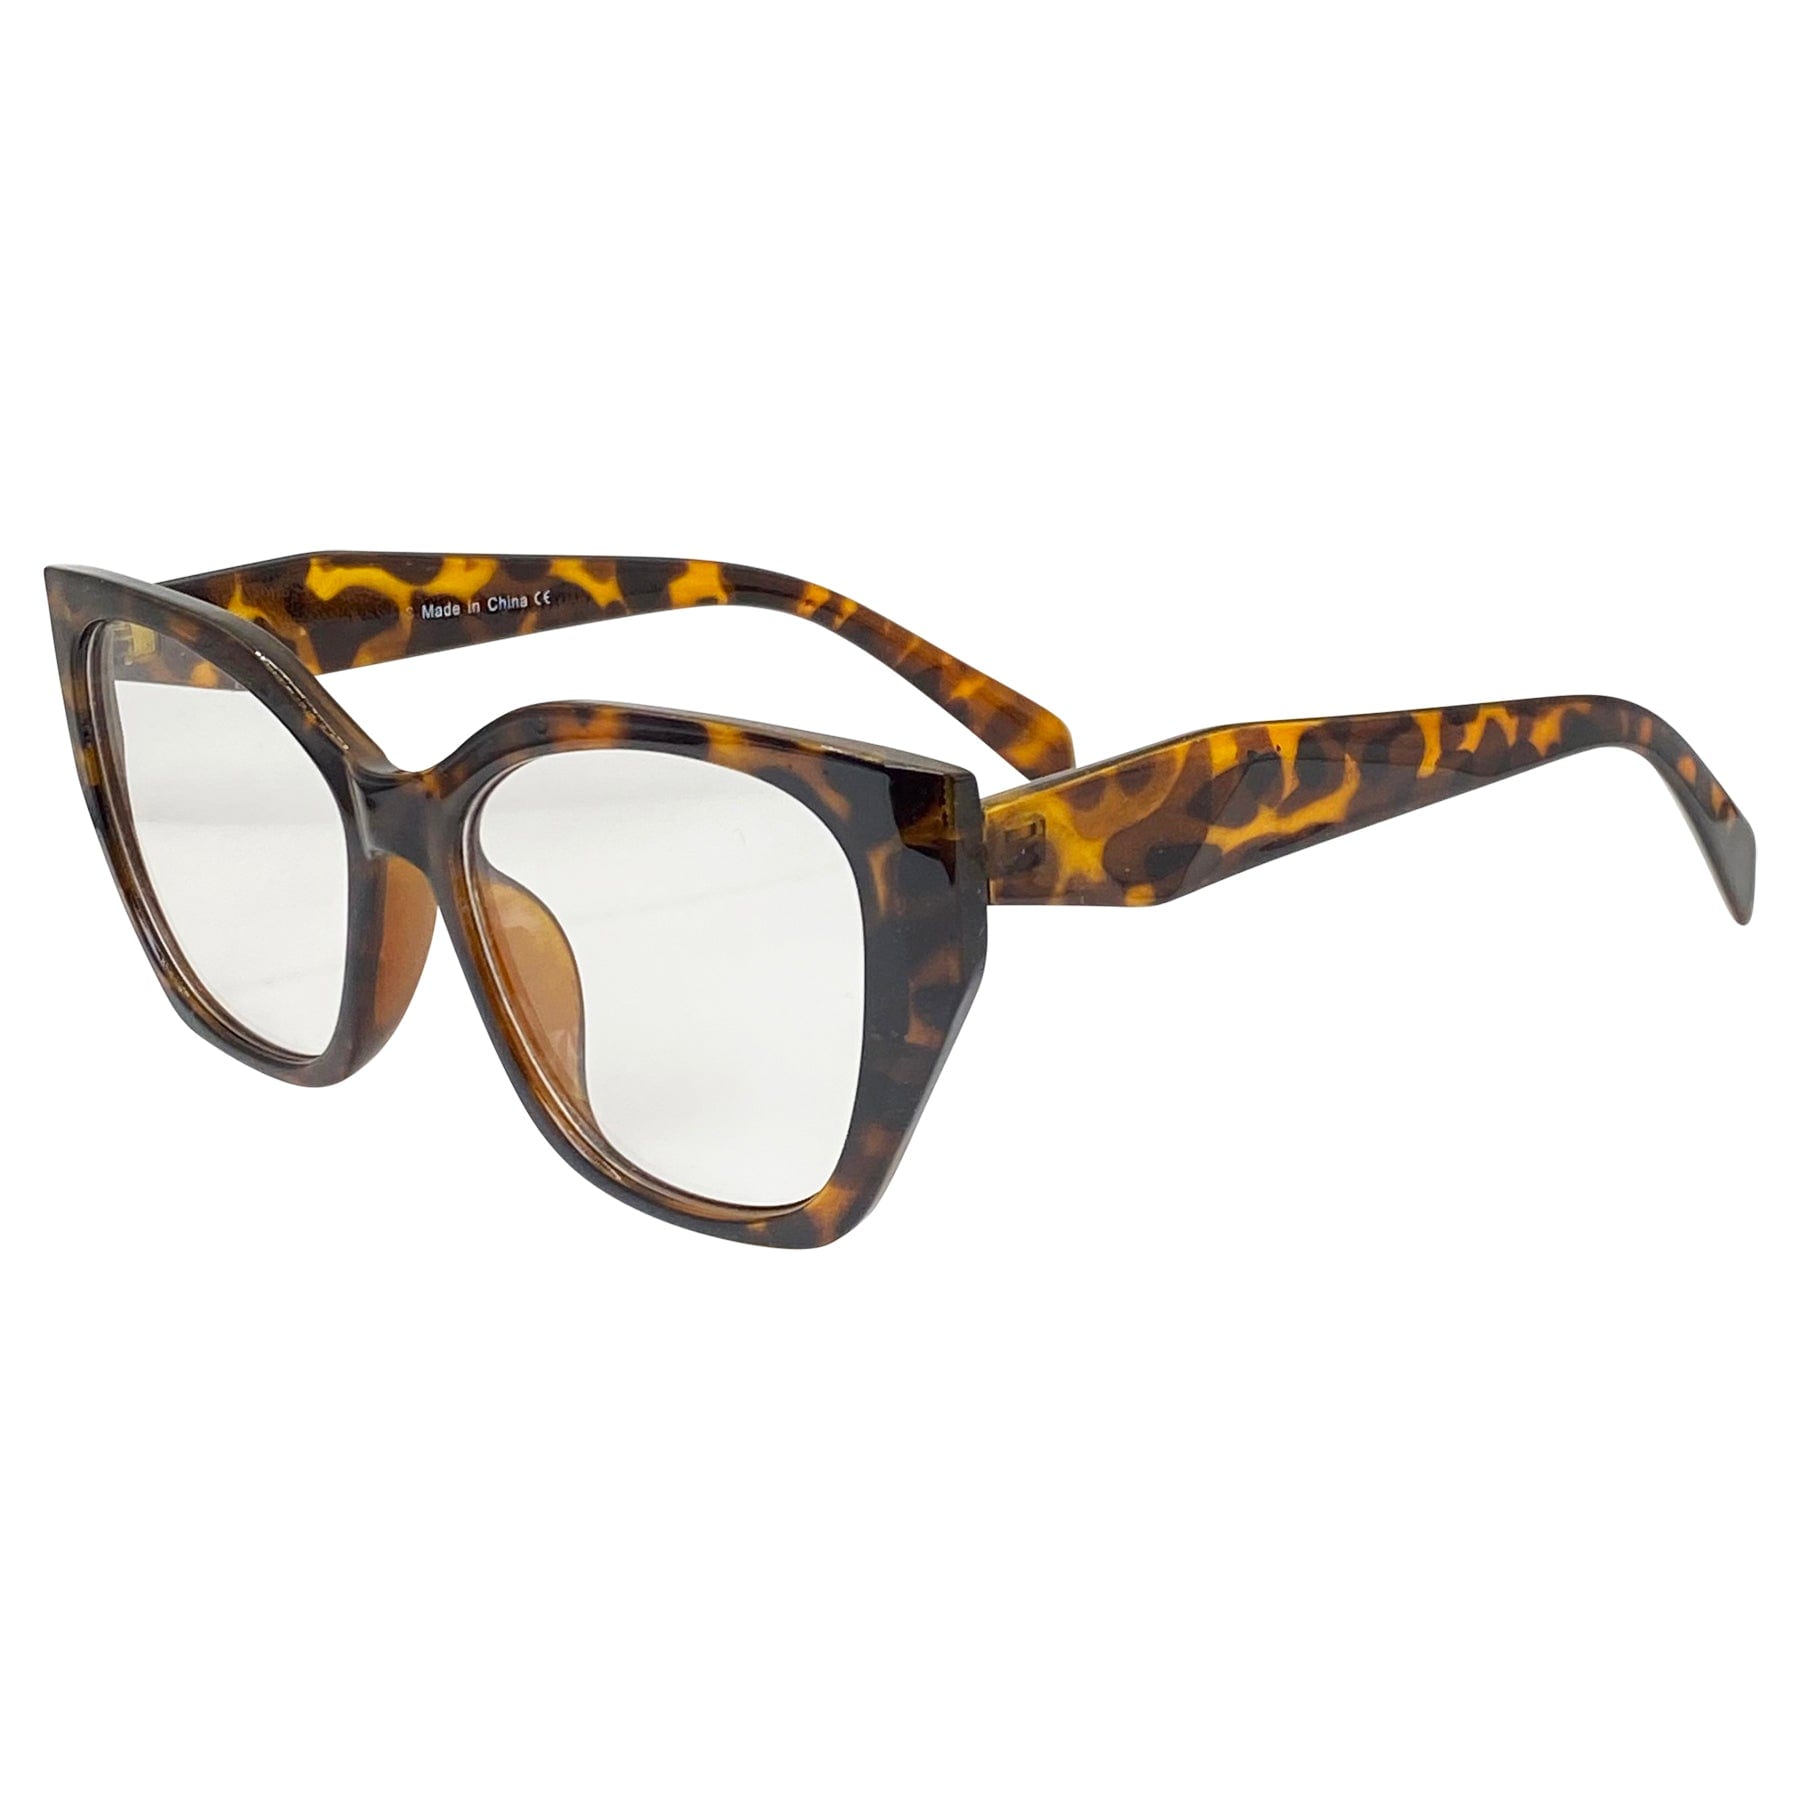 tortoise colored glasses with clear lens and cat eye frame